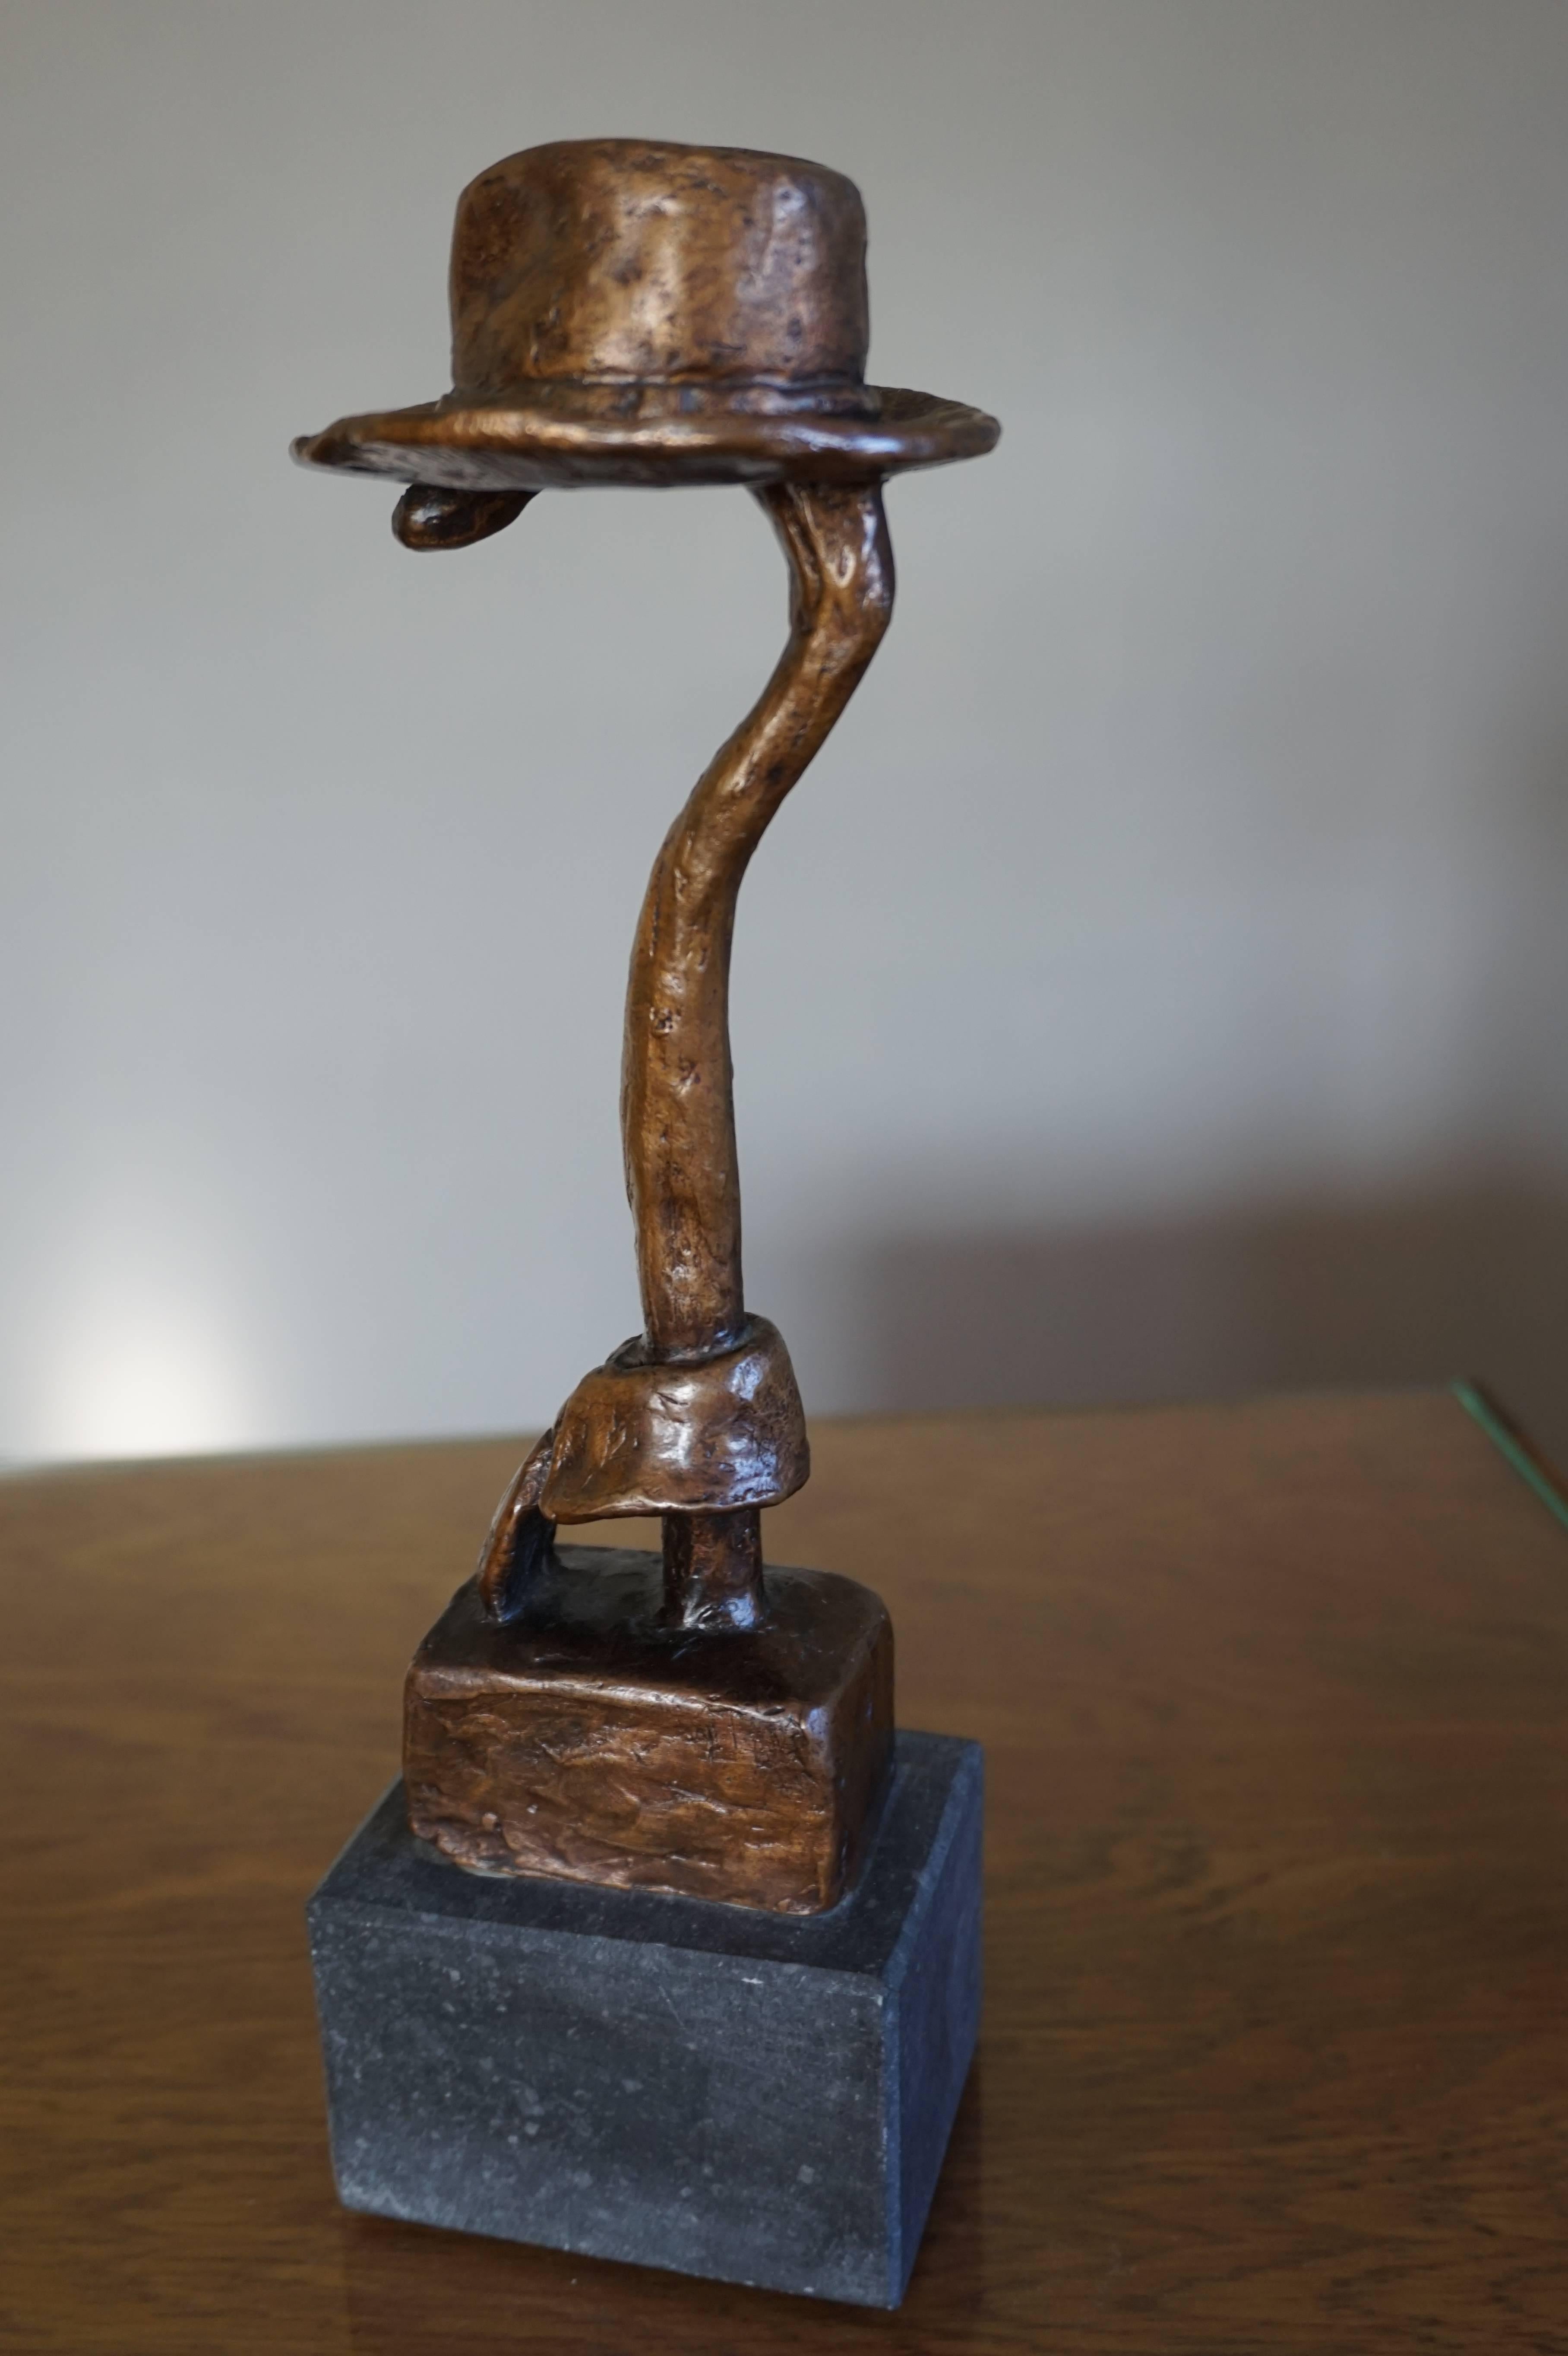 Hand-Crafted Unique Bronze Fashion Sculpture of Walking Cane in a Hat with Colar & Tie